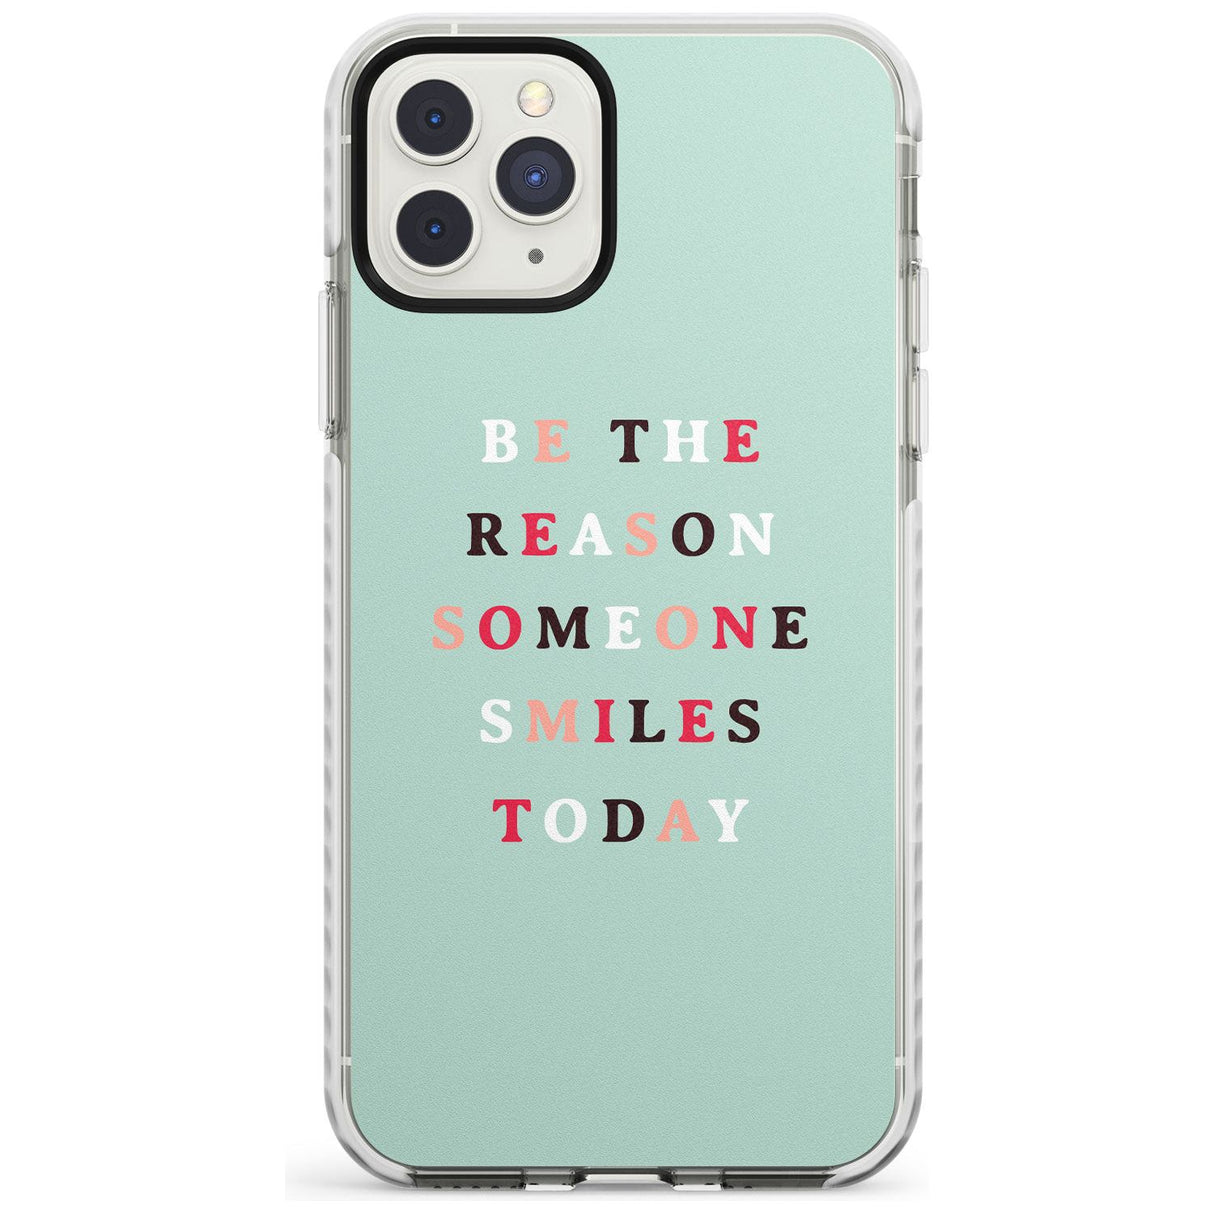 Be the reason someone smiles Impact Phone Case for iPhone 11 Pro Max